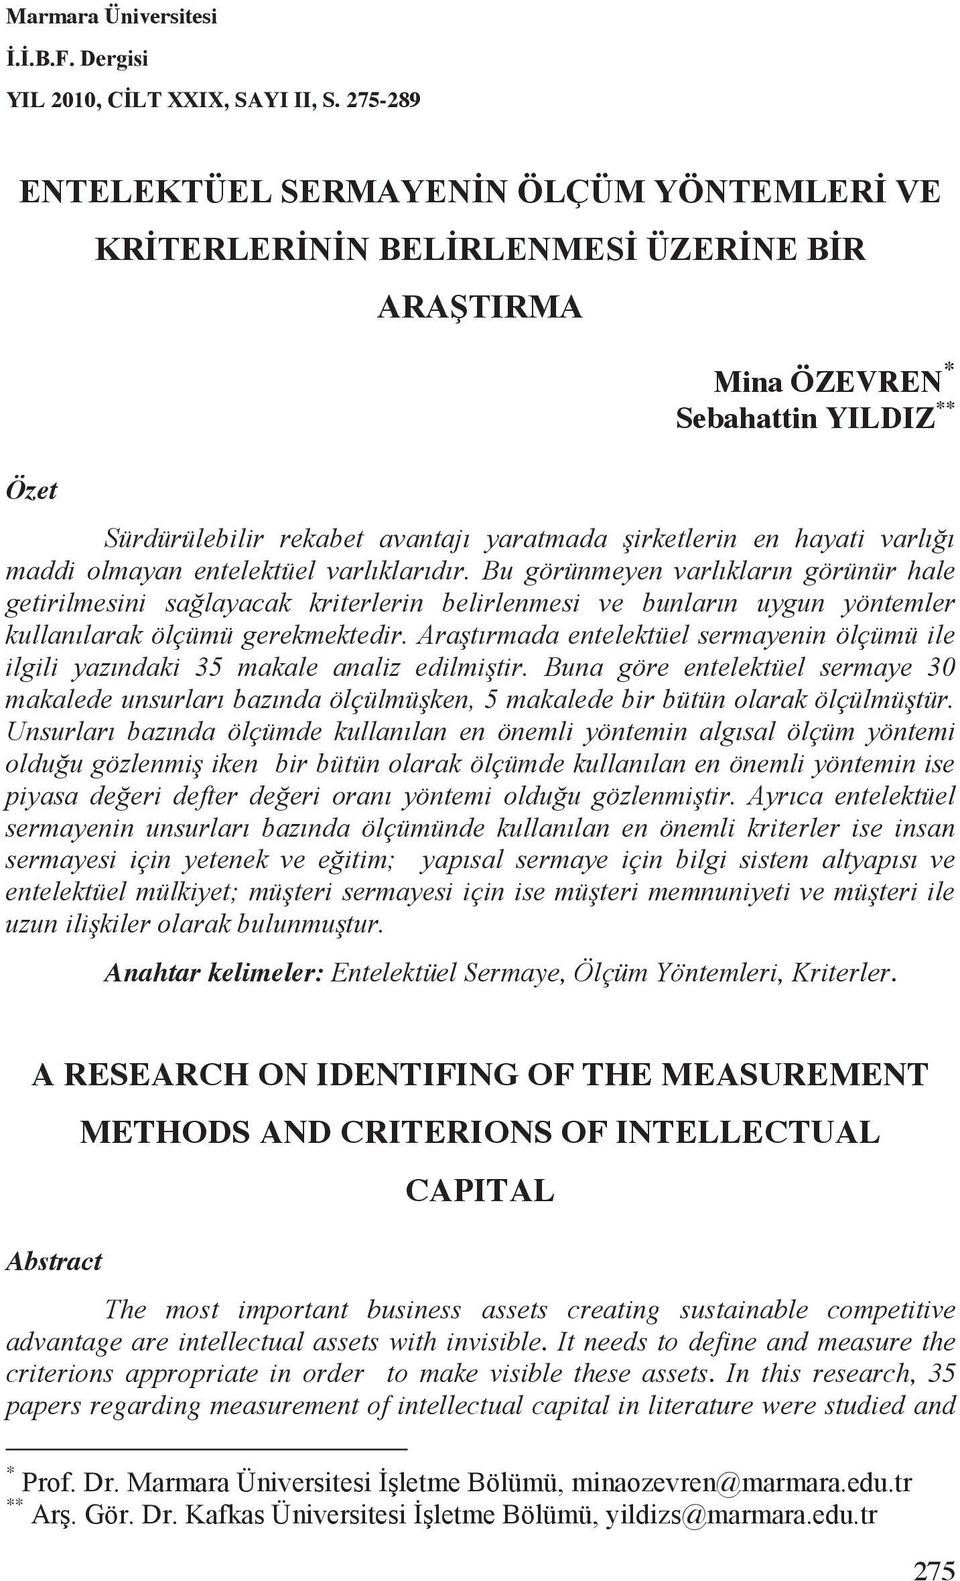 A RESEARCH ON IDENTIFING OF THE MEASUREMENT METHODS AND CRITERIONS OF INTELLECTUAL CAPITAL Abstract The most important business assets creating